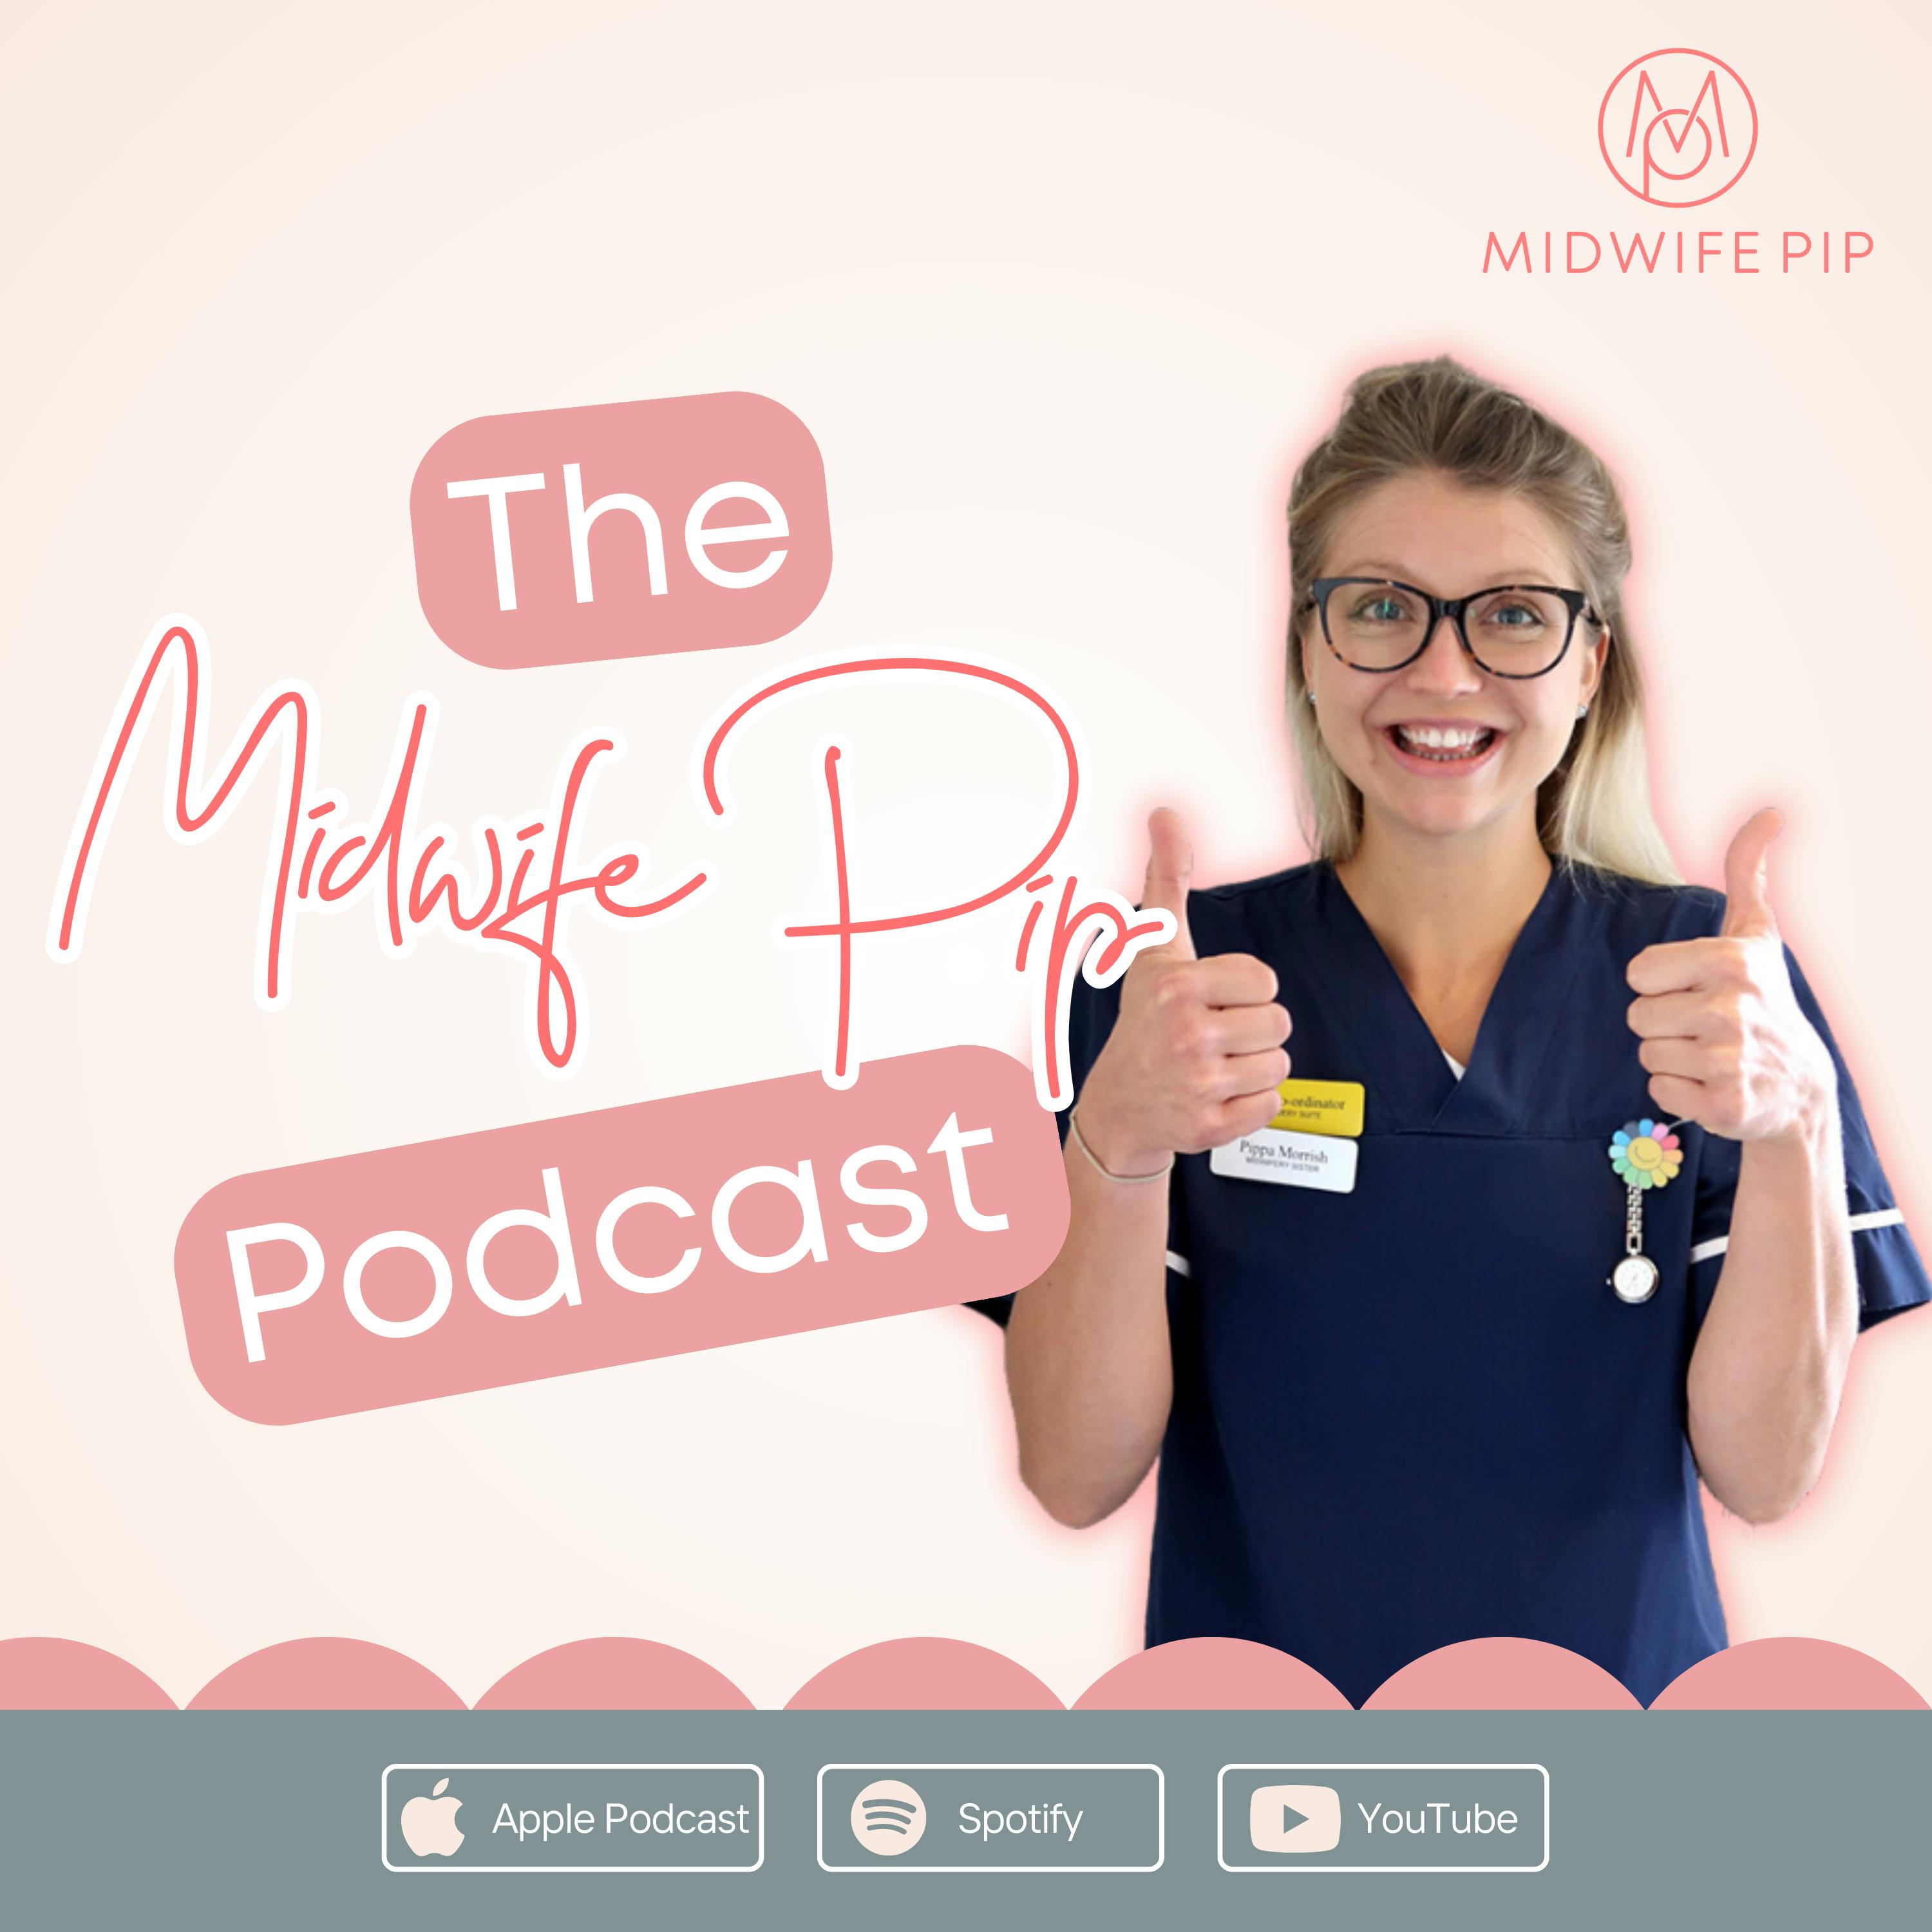 Midwife Pip Podcast